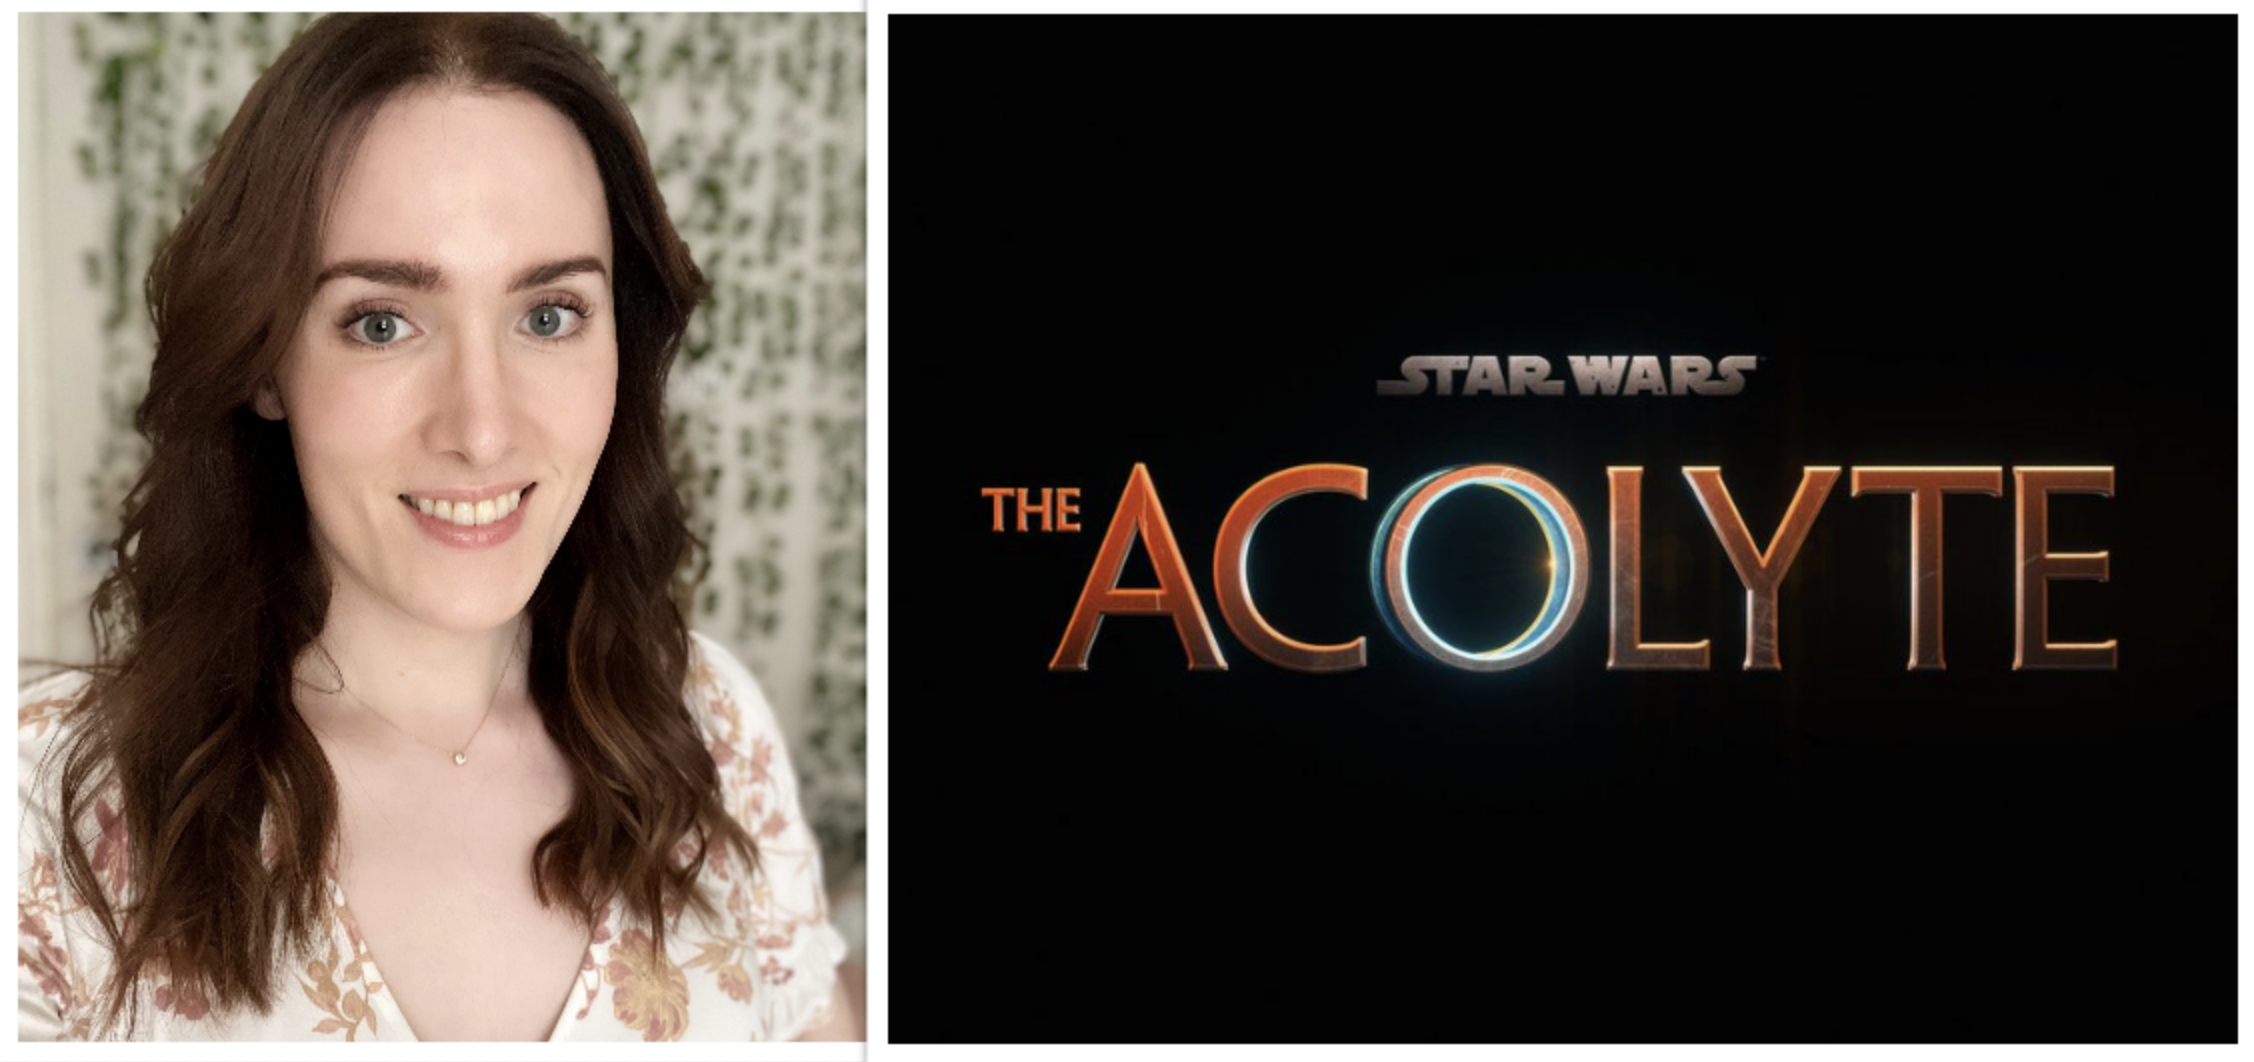 Abigail Thorn cast in 'Star Wars: The Acolyte'